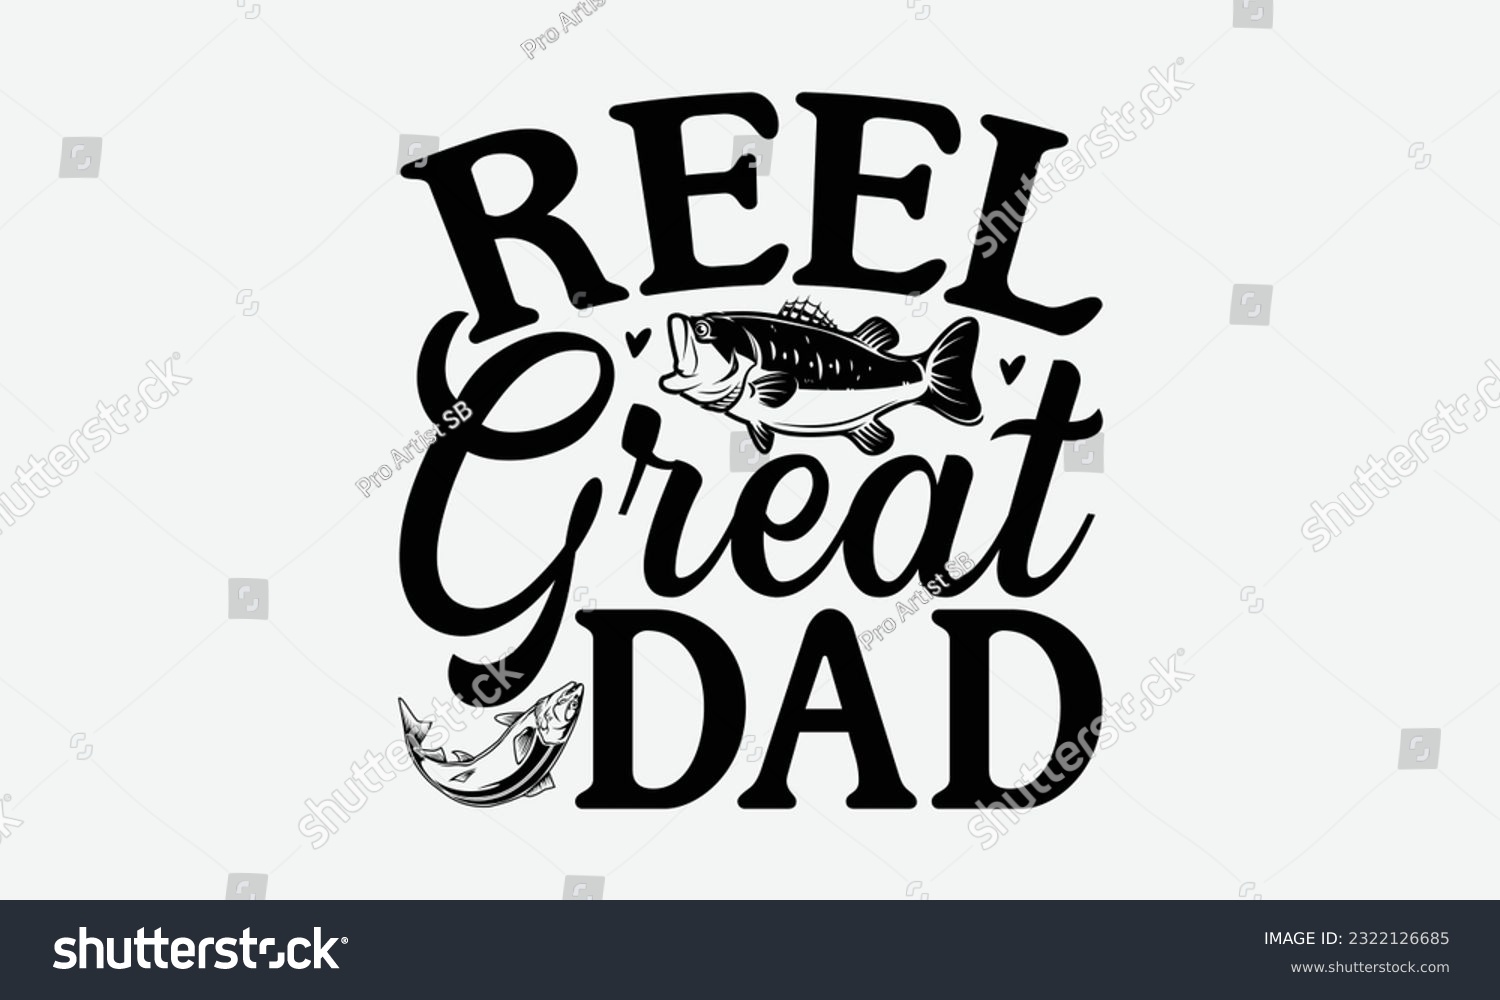 SVG of Reel Great Dad - Fishing SVG Design, Fisherman Quotes, Handmade Calligraphy Vector Illustration, Isolated On White Background. svg